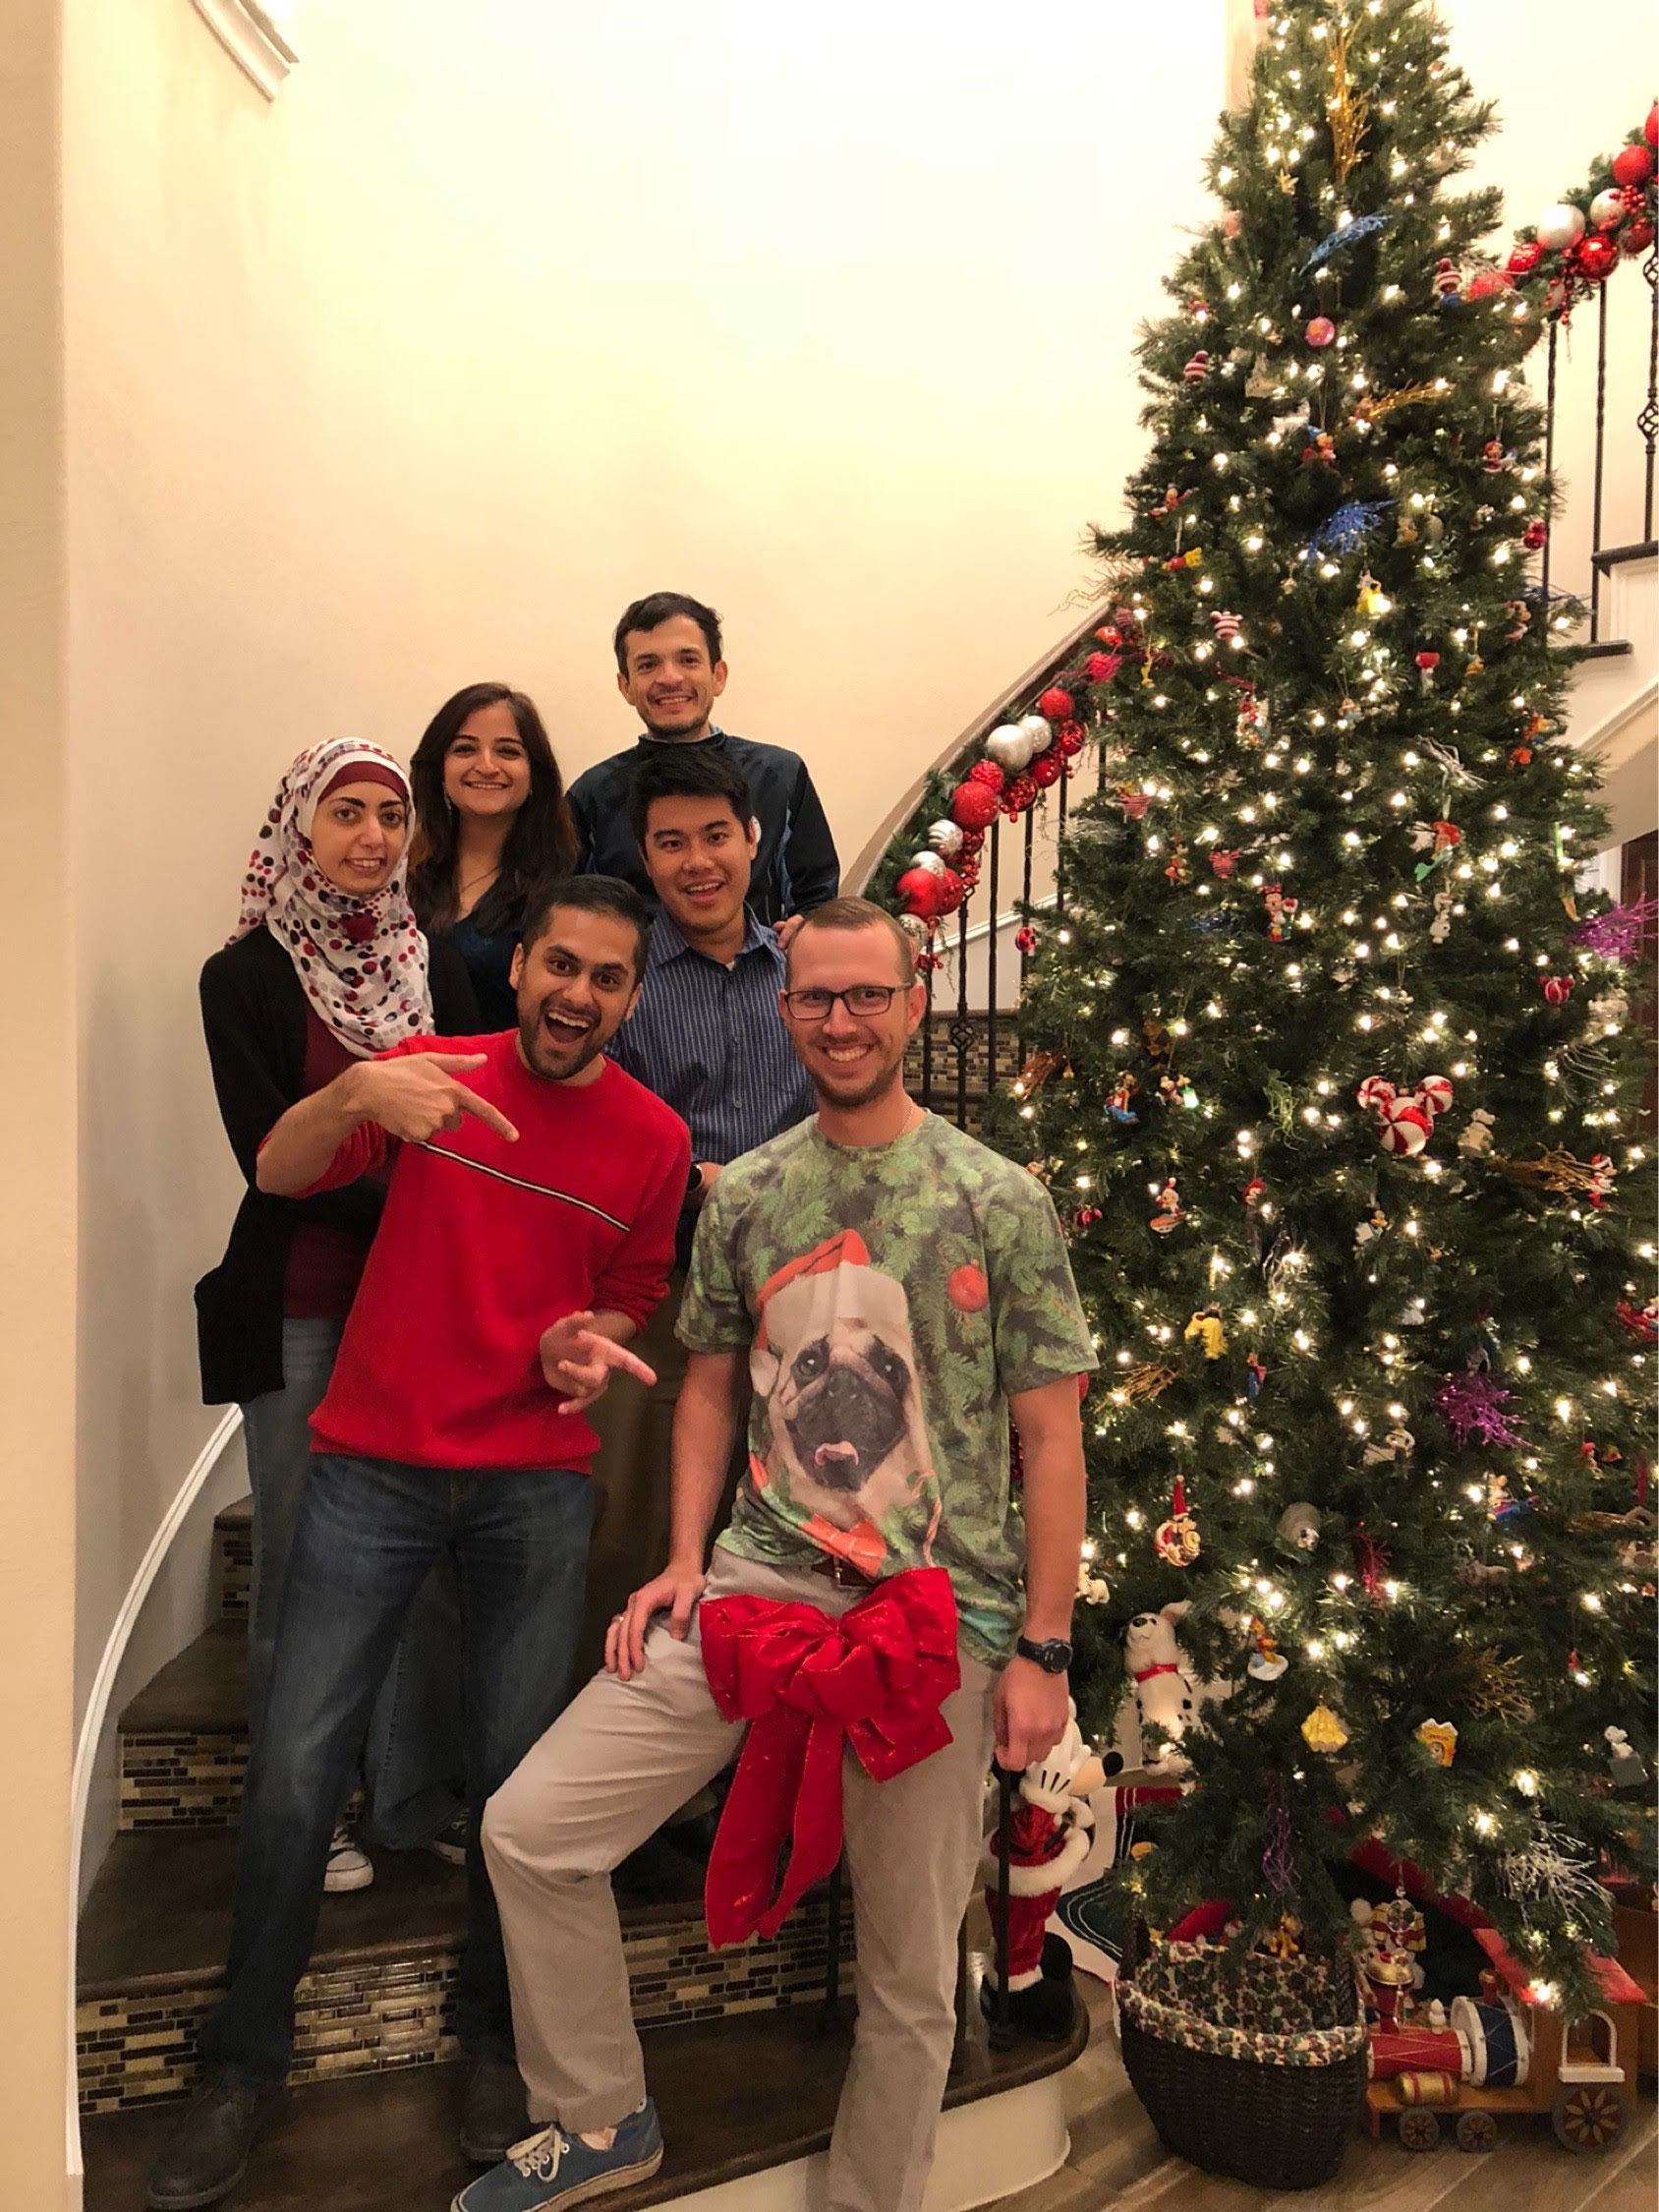 Group Photo by Christmas Tree